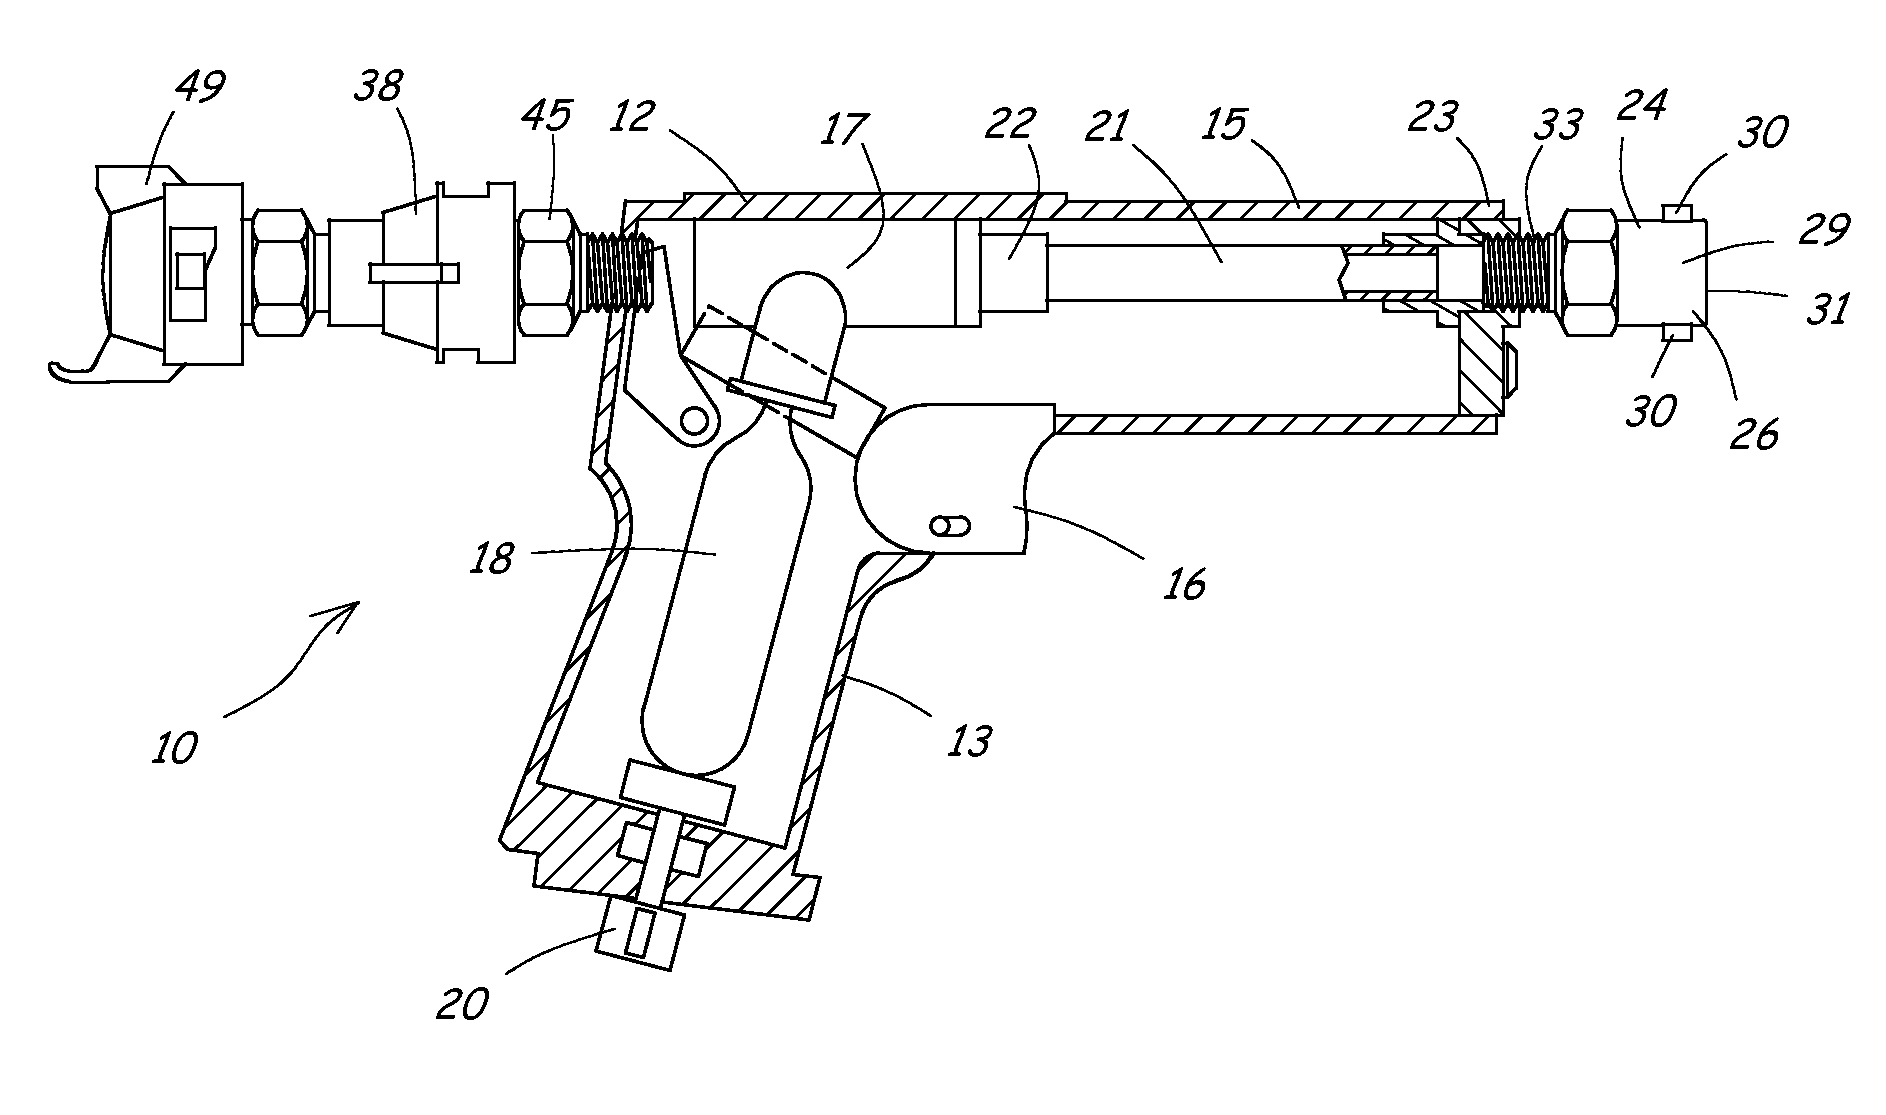 Handheld device and method for clearing obstructions from spray nozzles